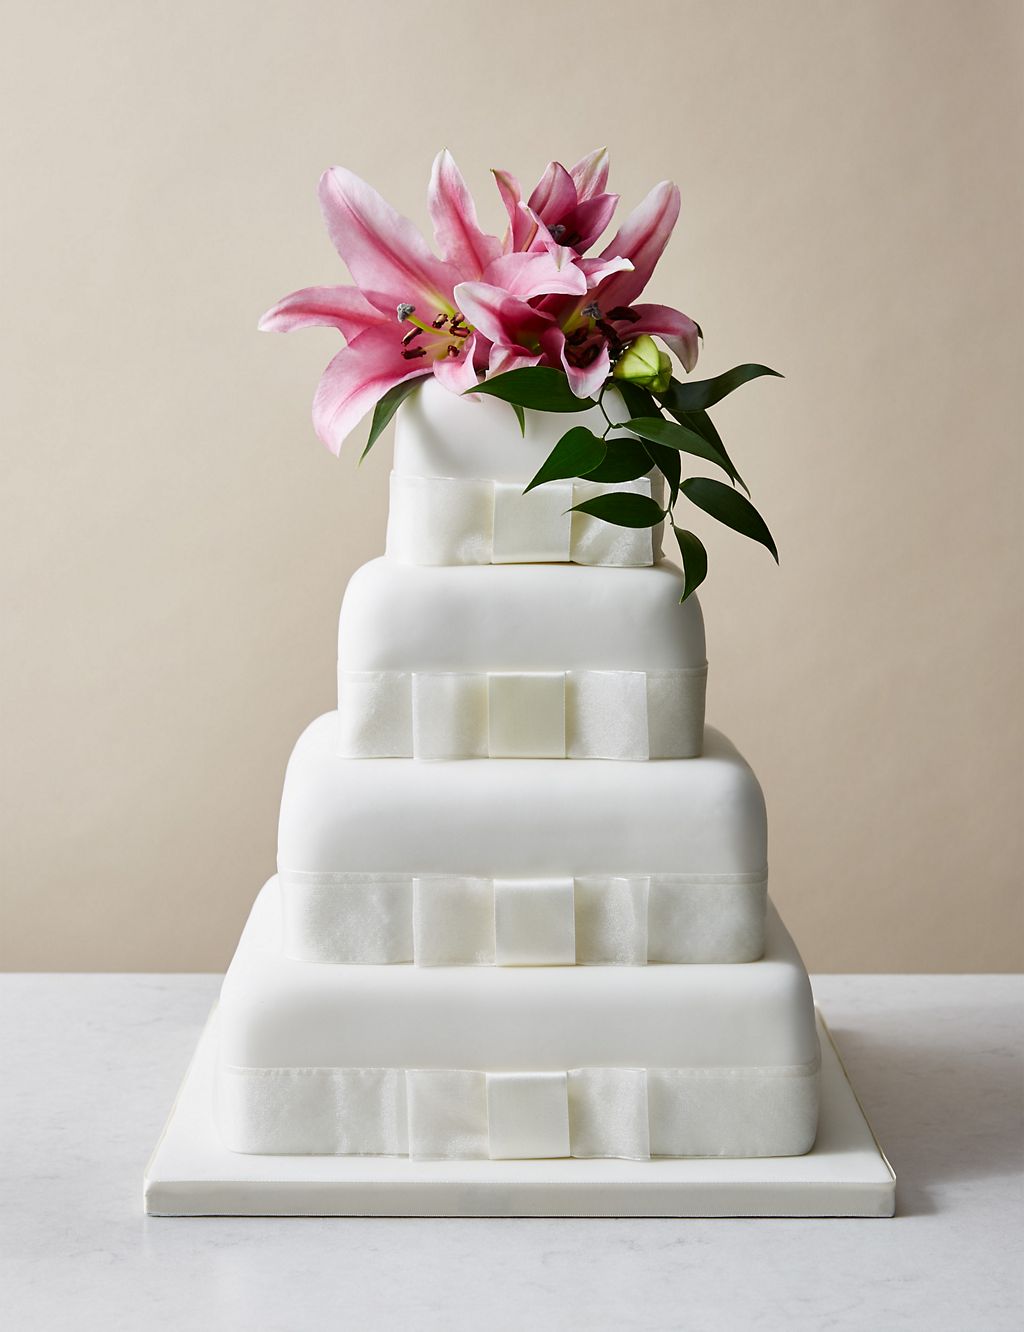 4 Tier Elegant Wedding Cake – Assorted Flavours with Chocolate (Serves 200) Last order date 26th March 3 of 7